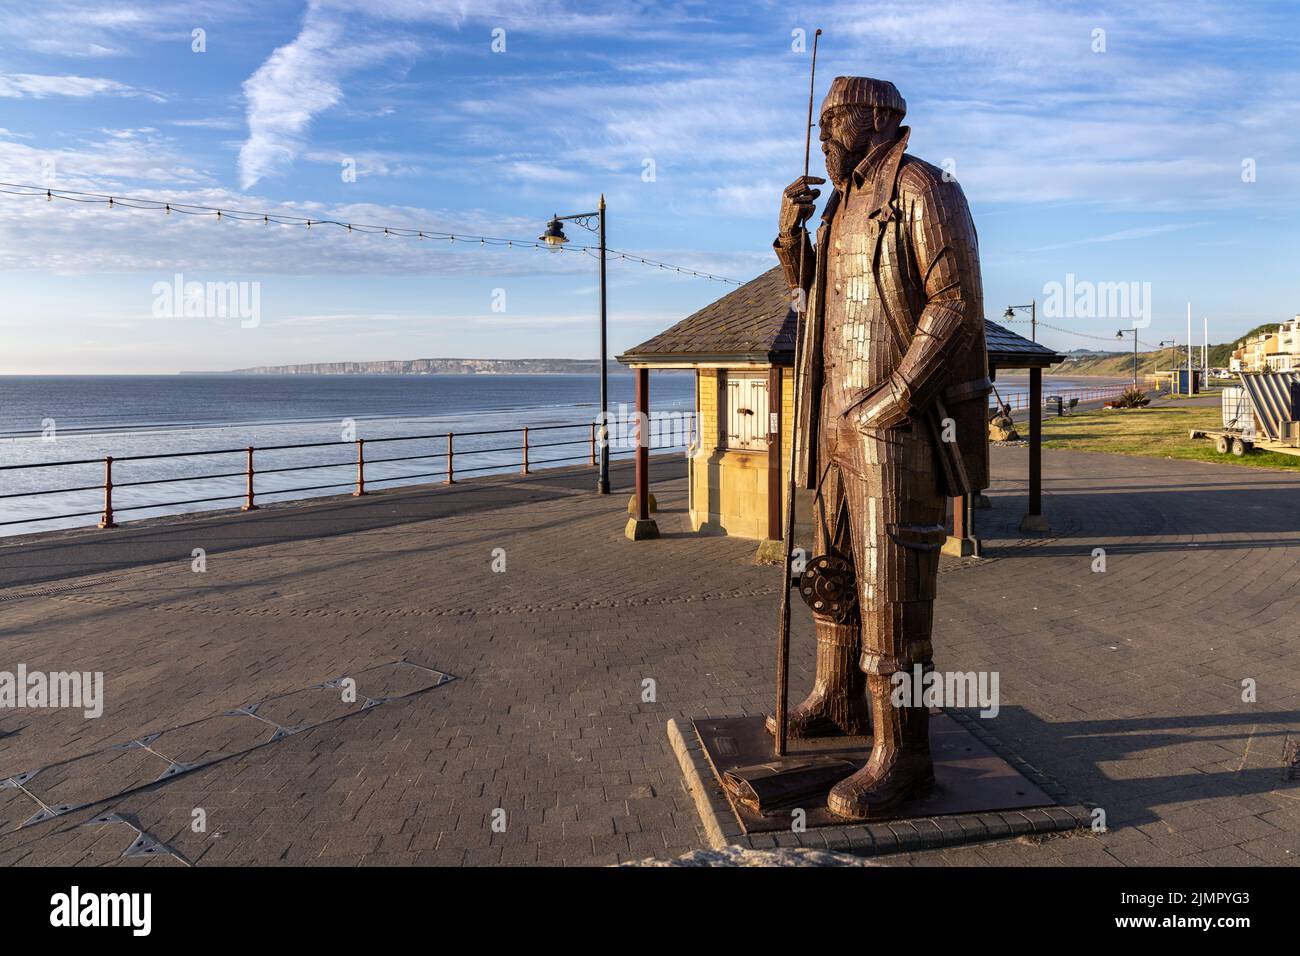 A High Tide In Short Wellies, a sculpture by Ray Lonsdale of a fisherman that stands tall and proud on the promenade at Filey, North Yorkshire. Stock Photo